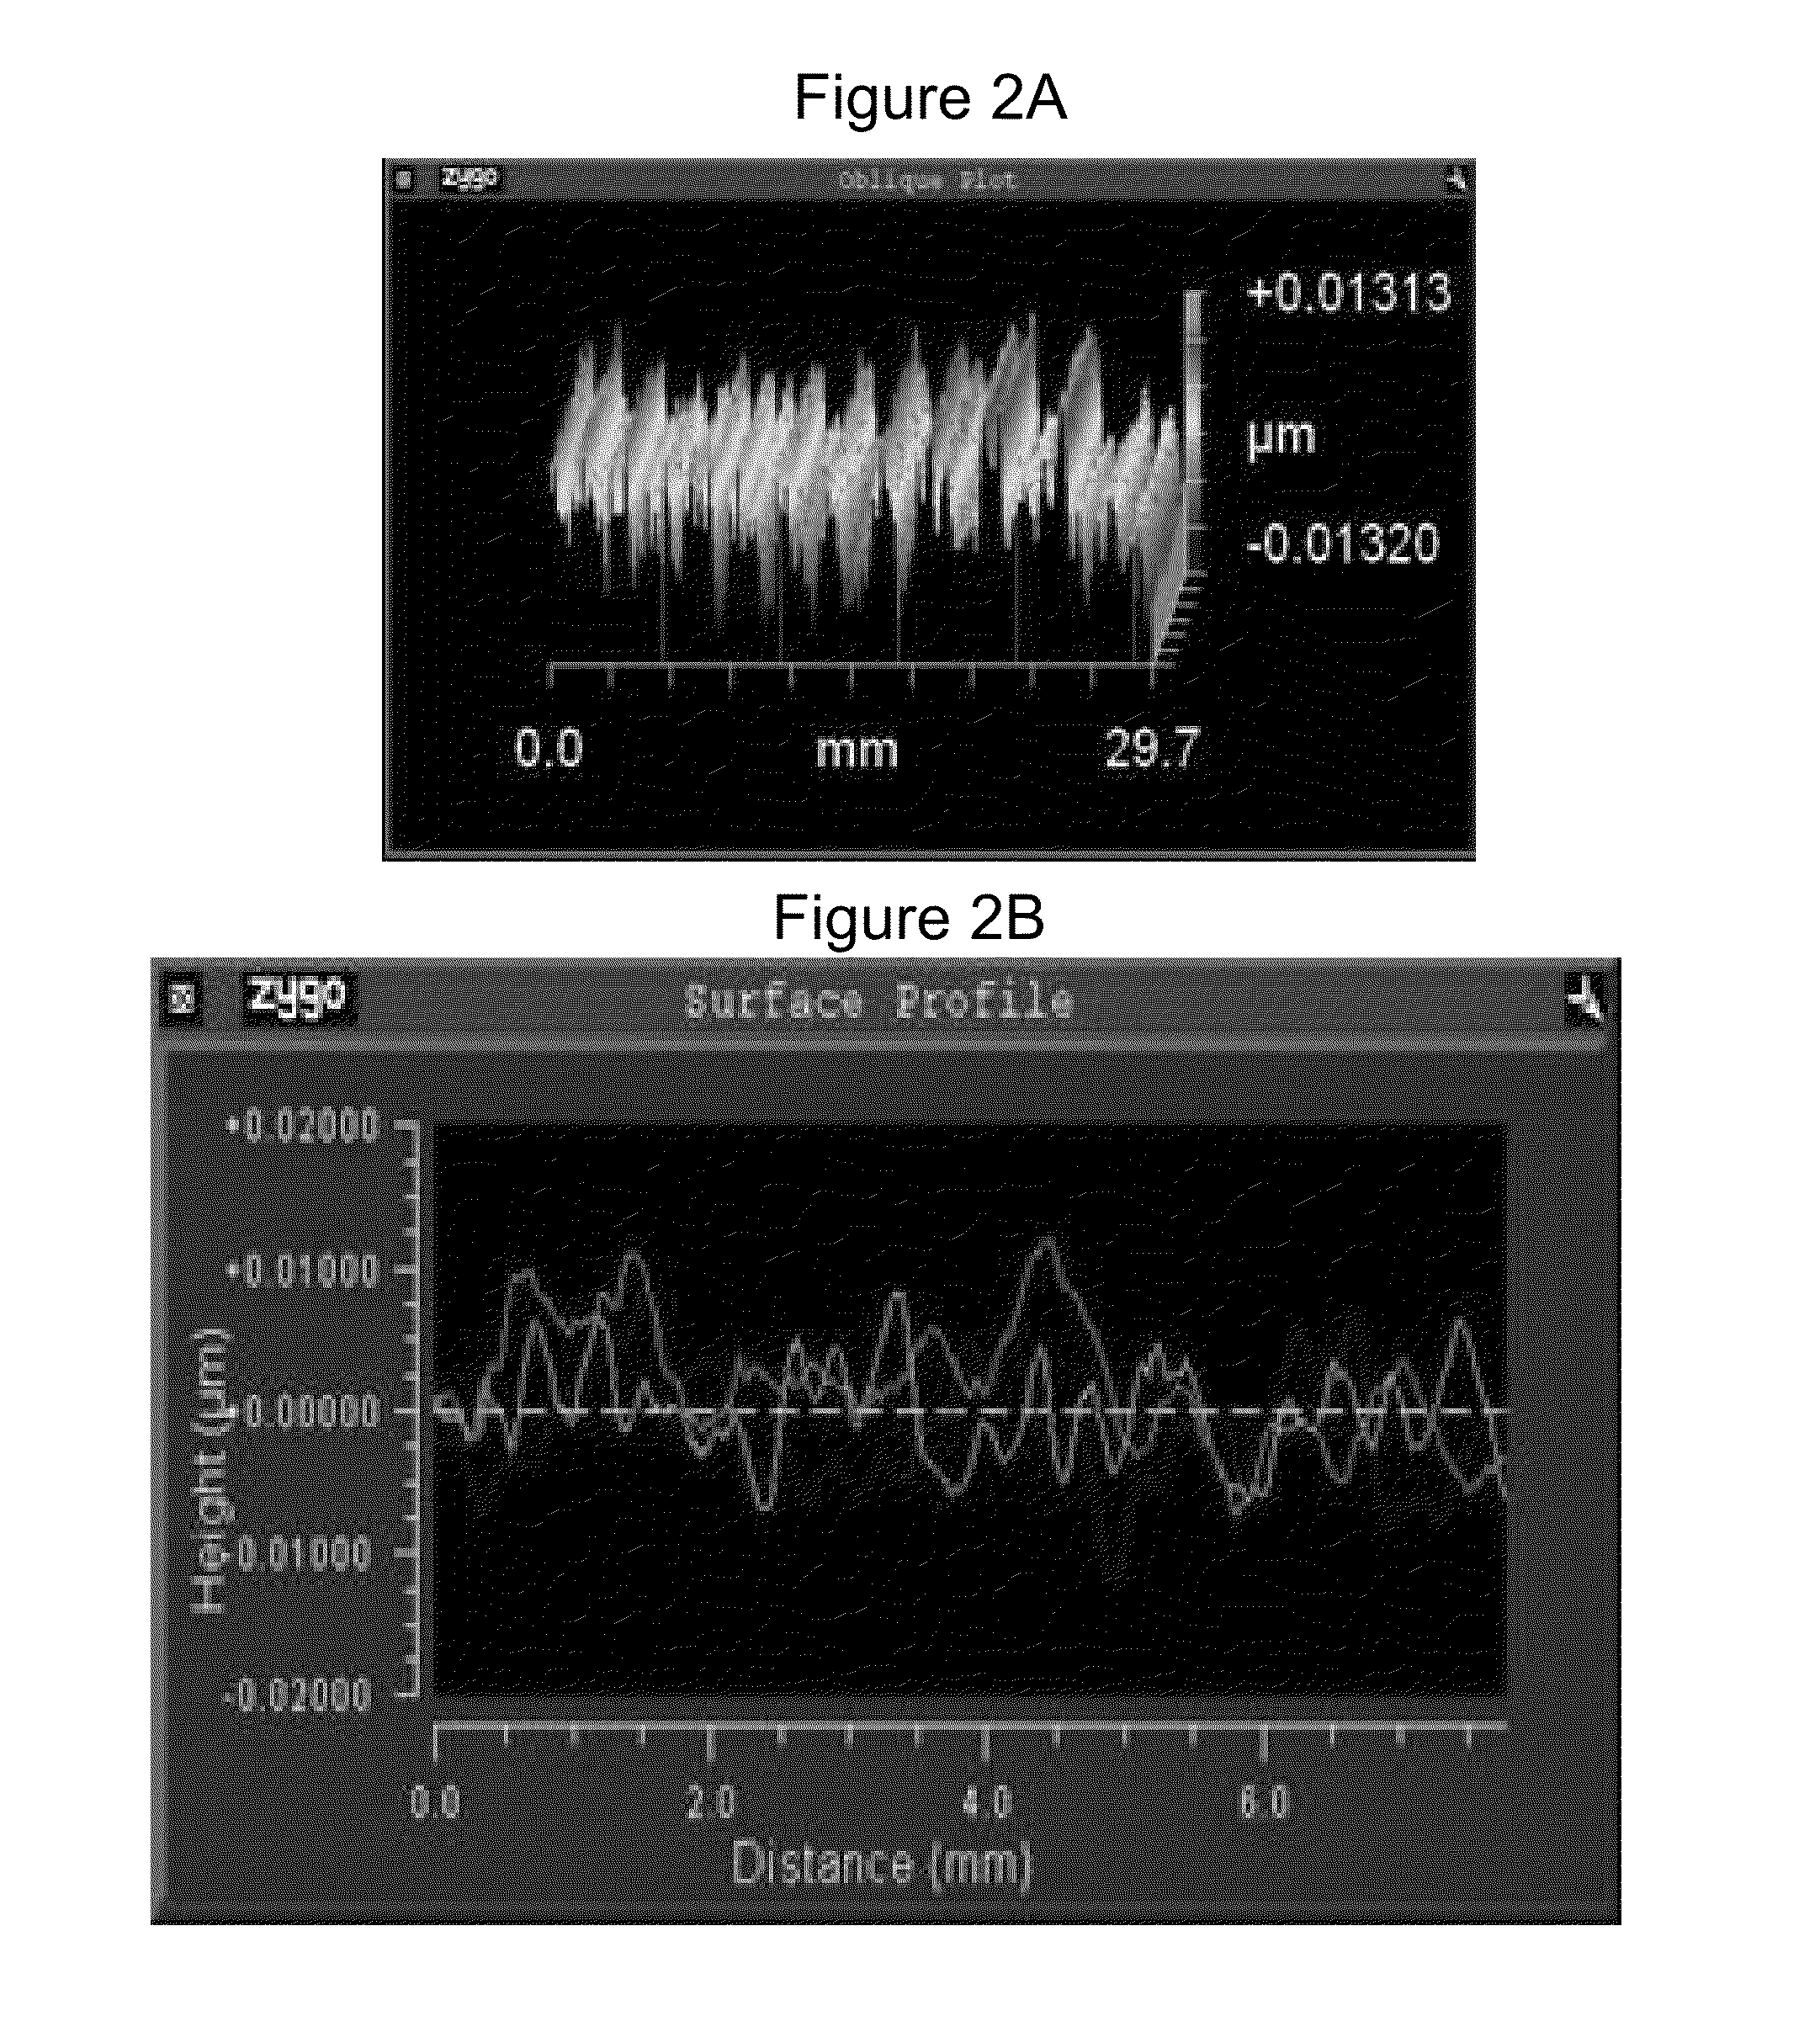 Reduced striae low expansion glass and elements, and a method for making same